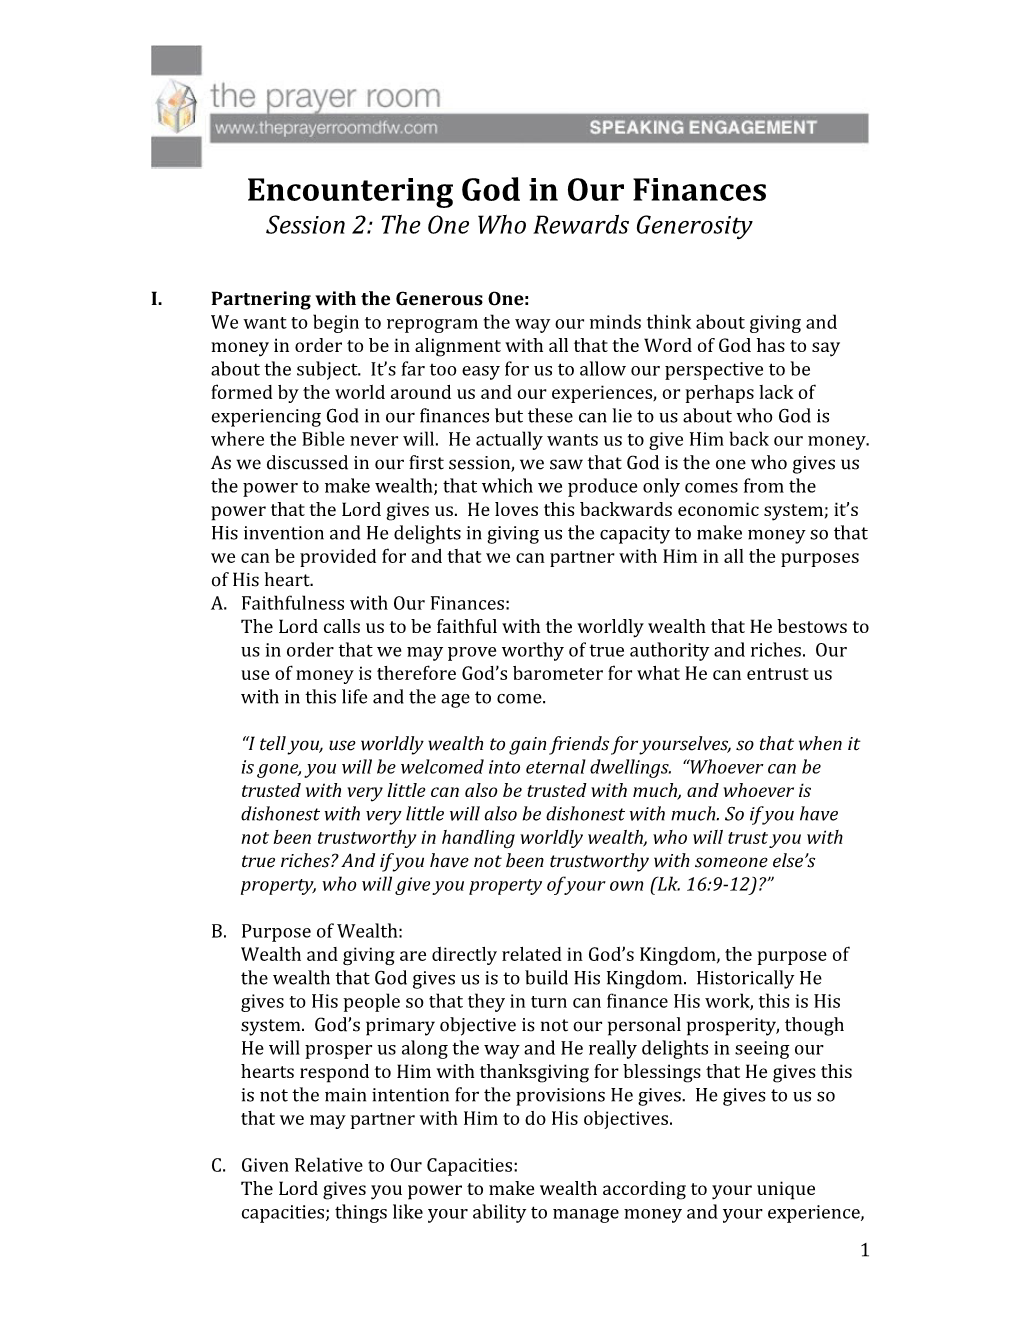 Encountering God in Our Finances